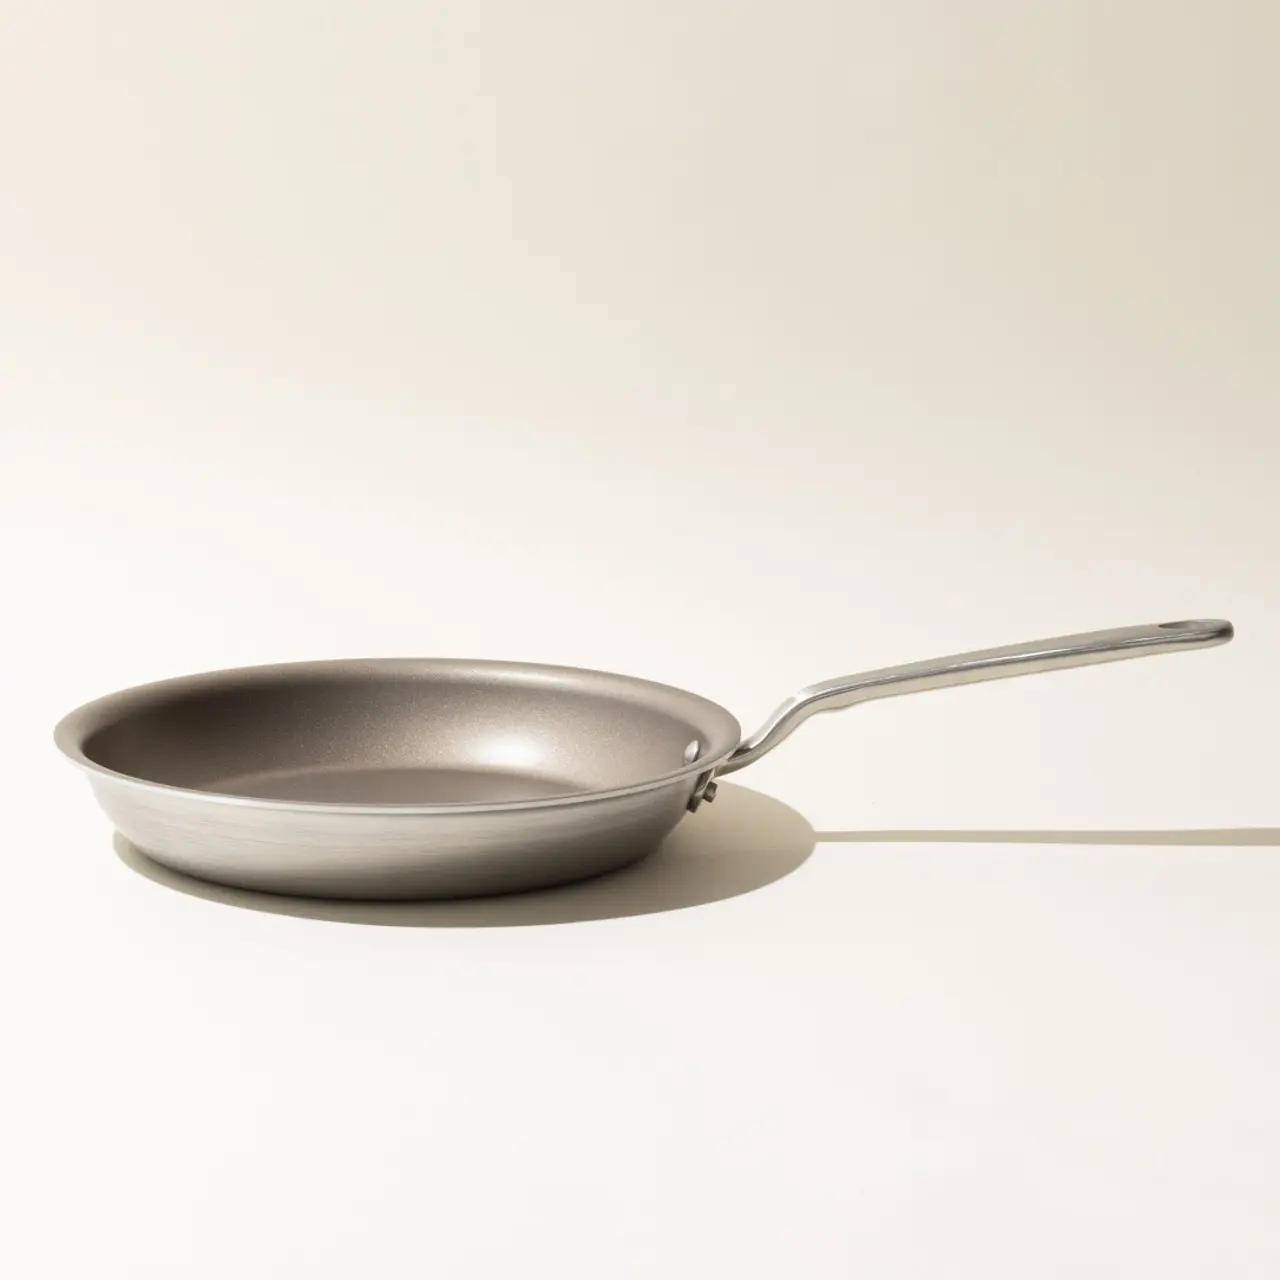 A non-stick frying pan with a stainless steel handle sits on a neutral background, casting a soft shadow to the right.